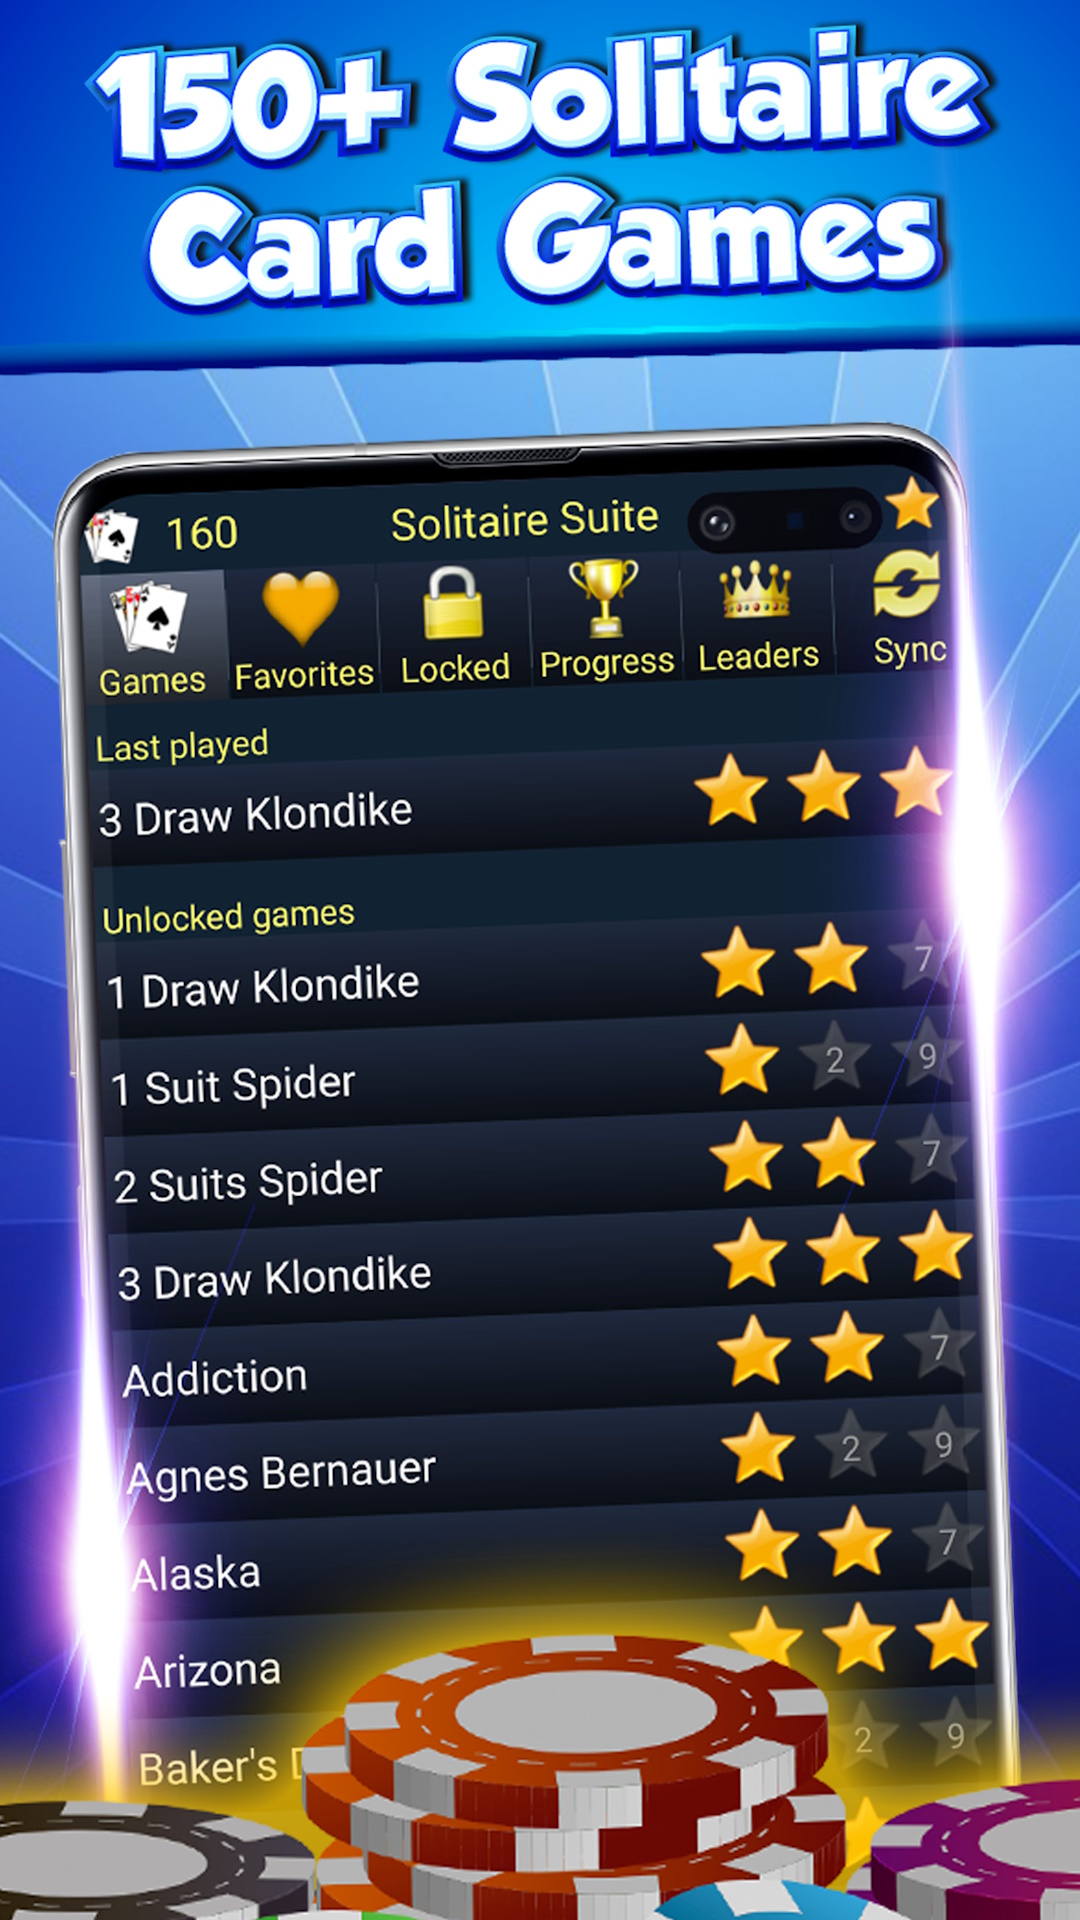 🕹️ Play Spider Solitaire Game: Free Online 1, 2, or 4 Suit